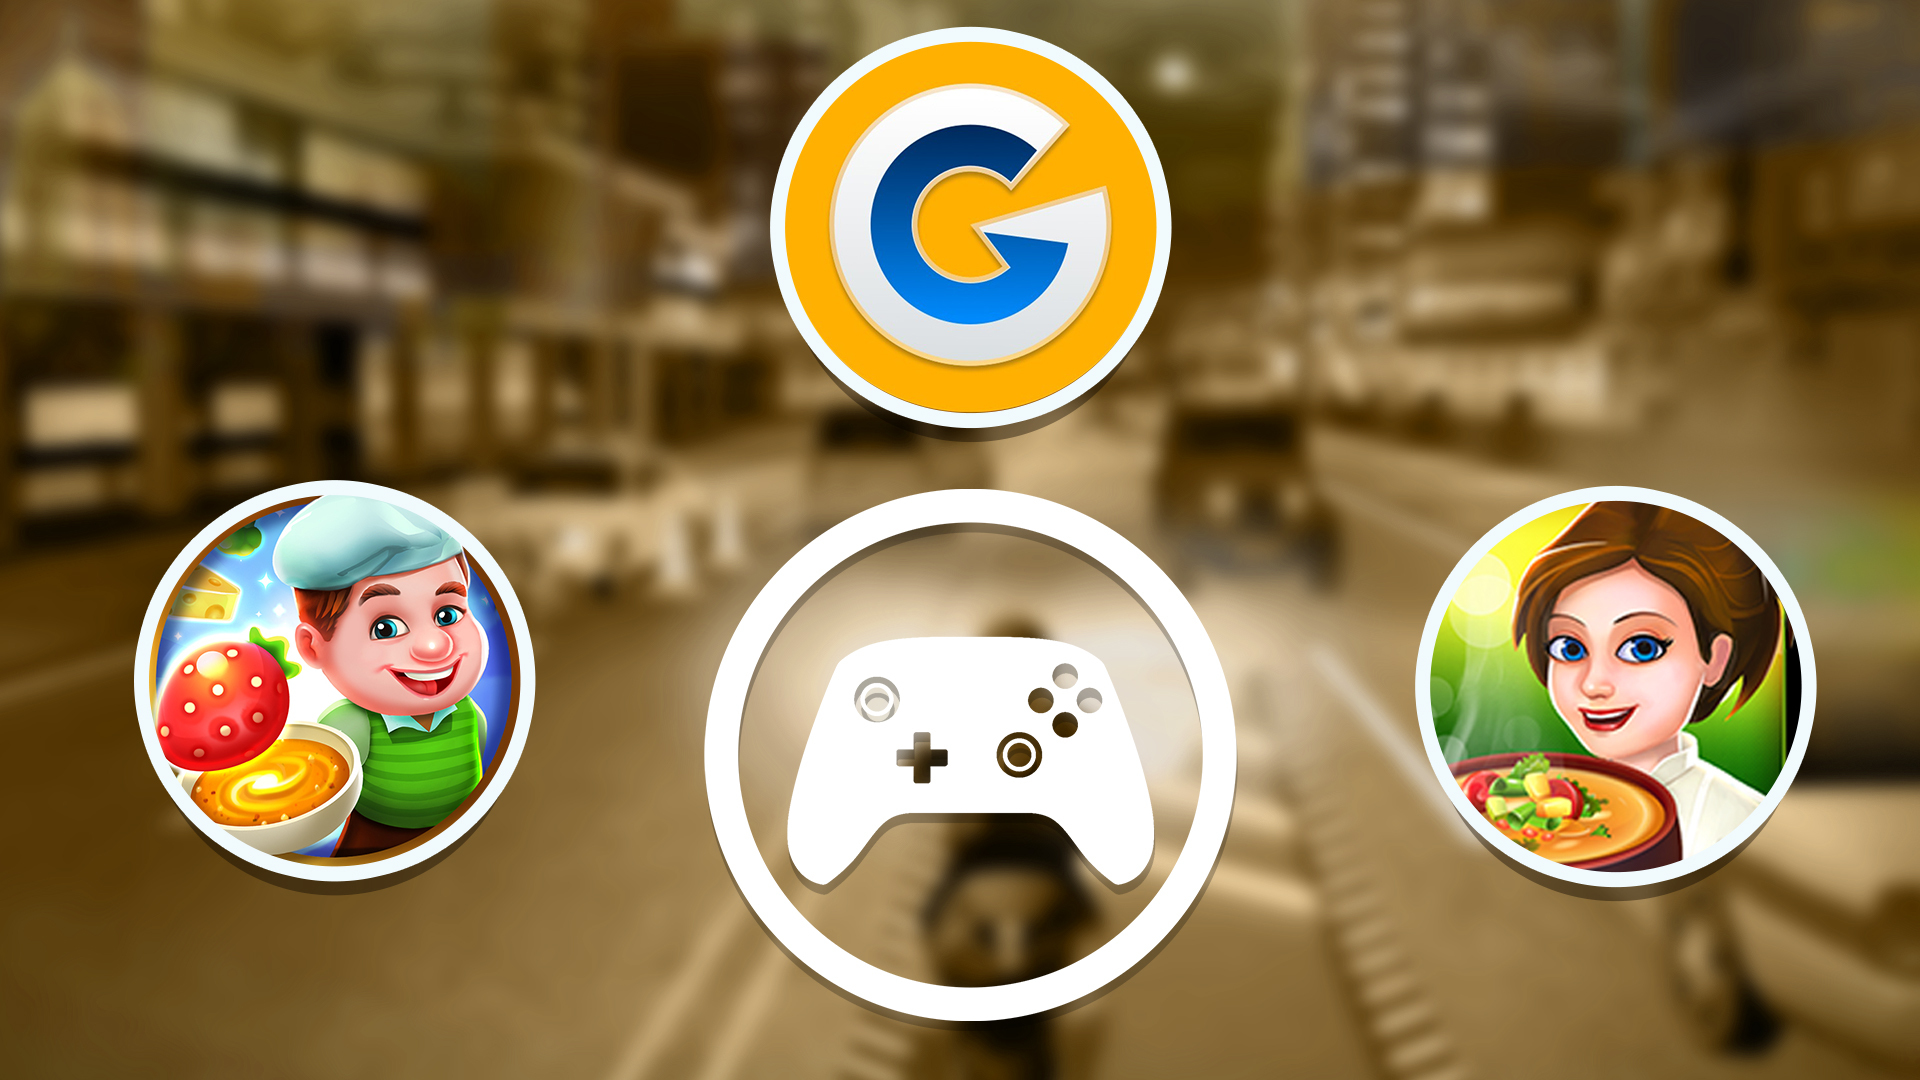 World of Gaming – Game Categories, Genres and Sub-Genres